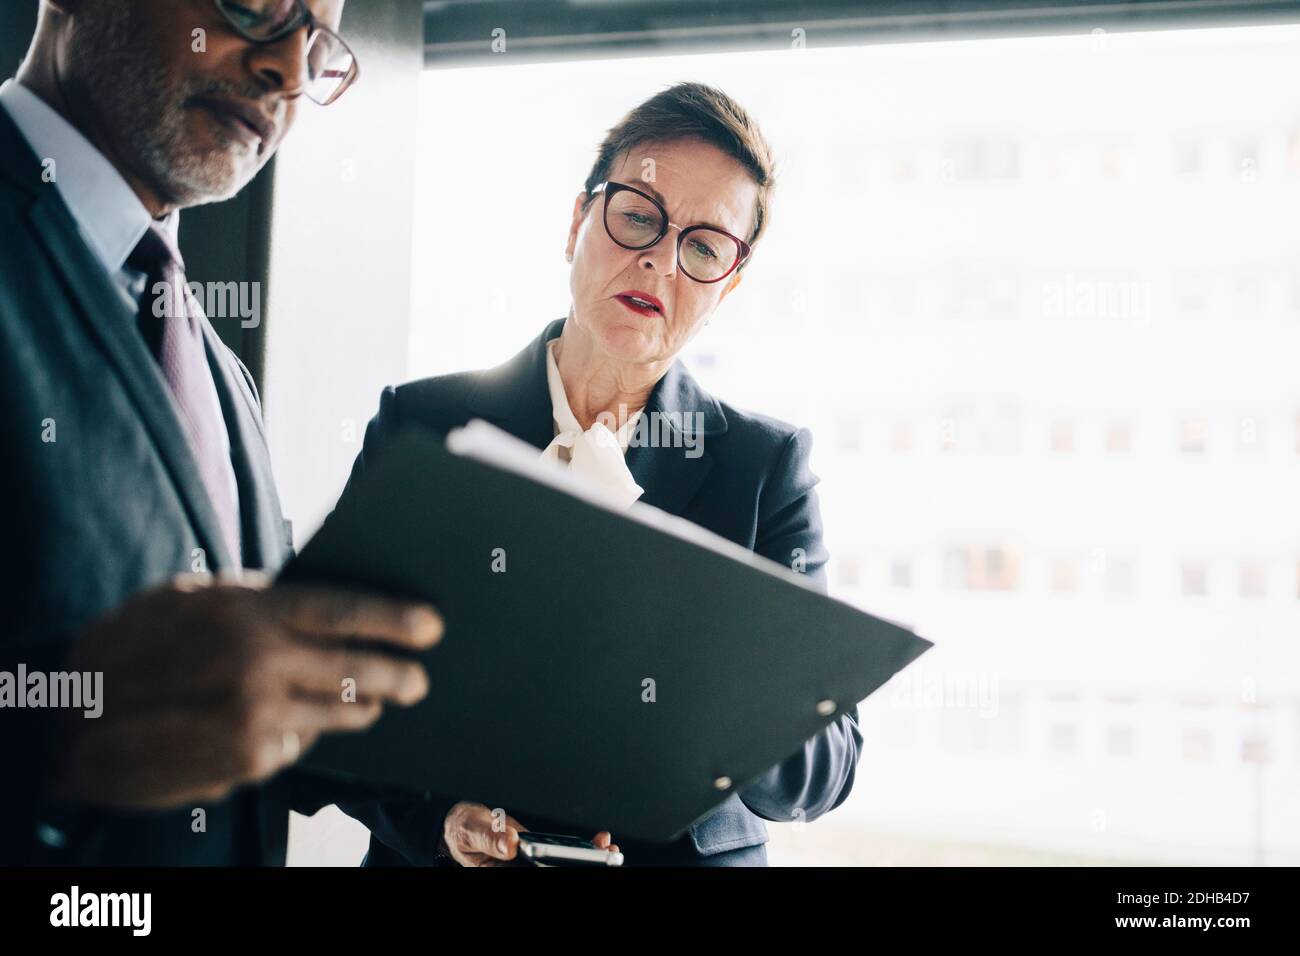 Senior professional discussing strategy with colleague at workplace Stock Photo